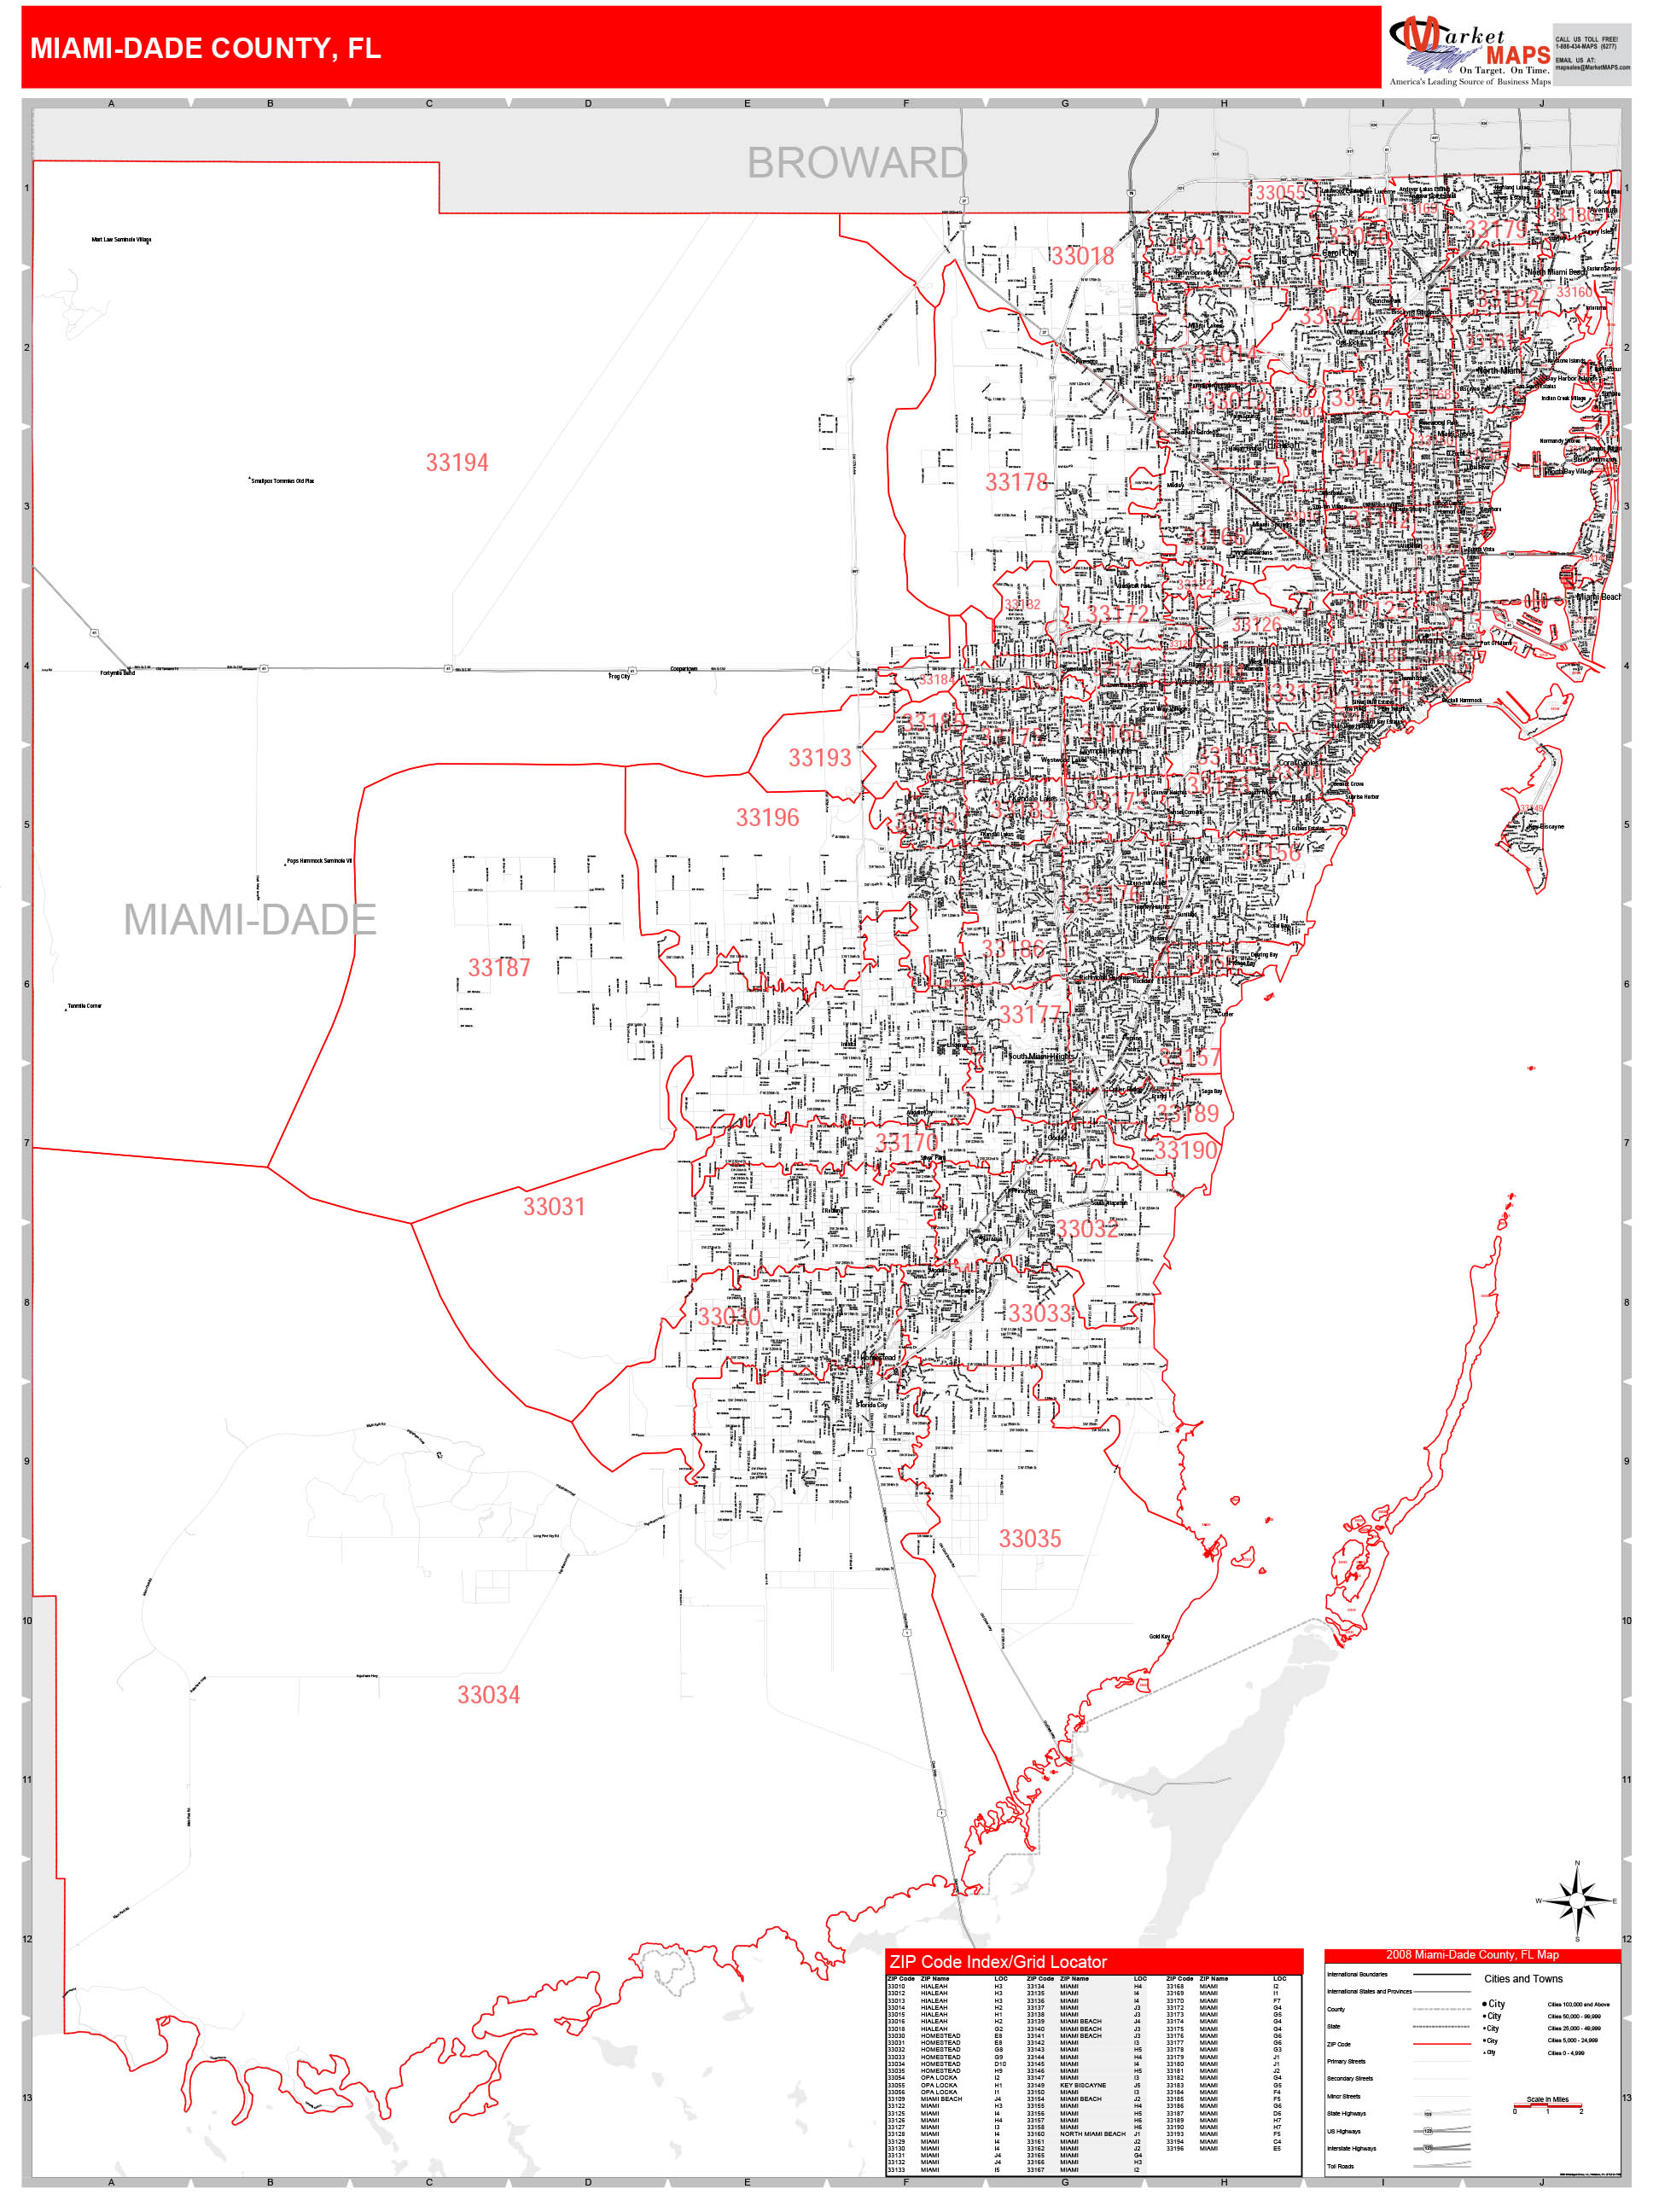 Miami-Dade County, FL Zip Code Wall Map Red Line Style by MarketMAPS